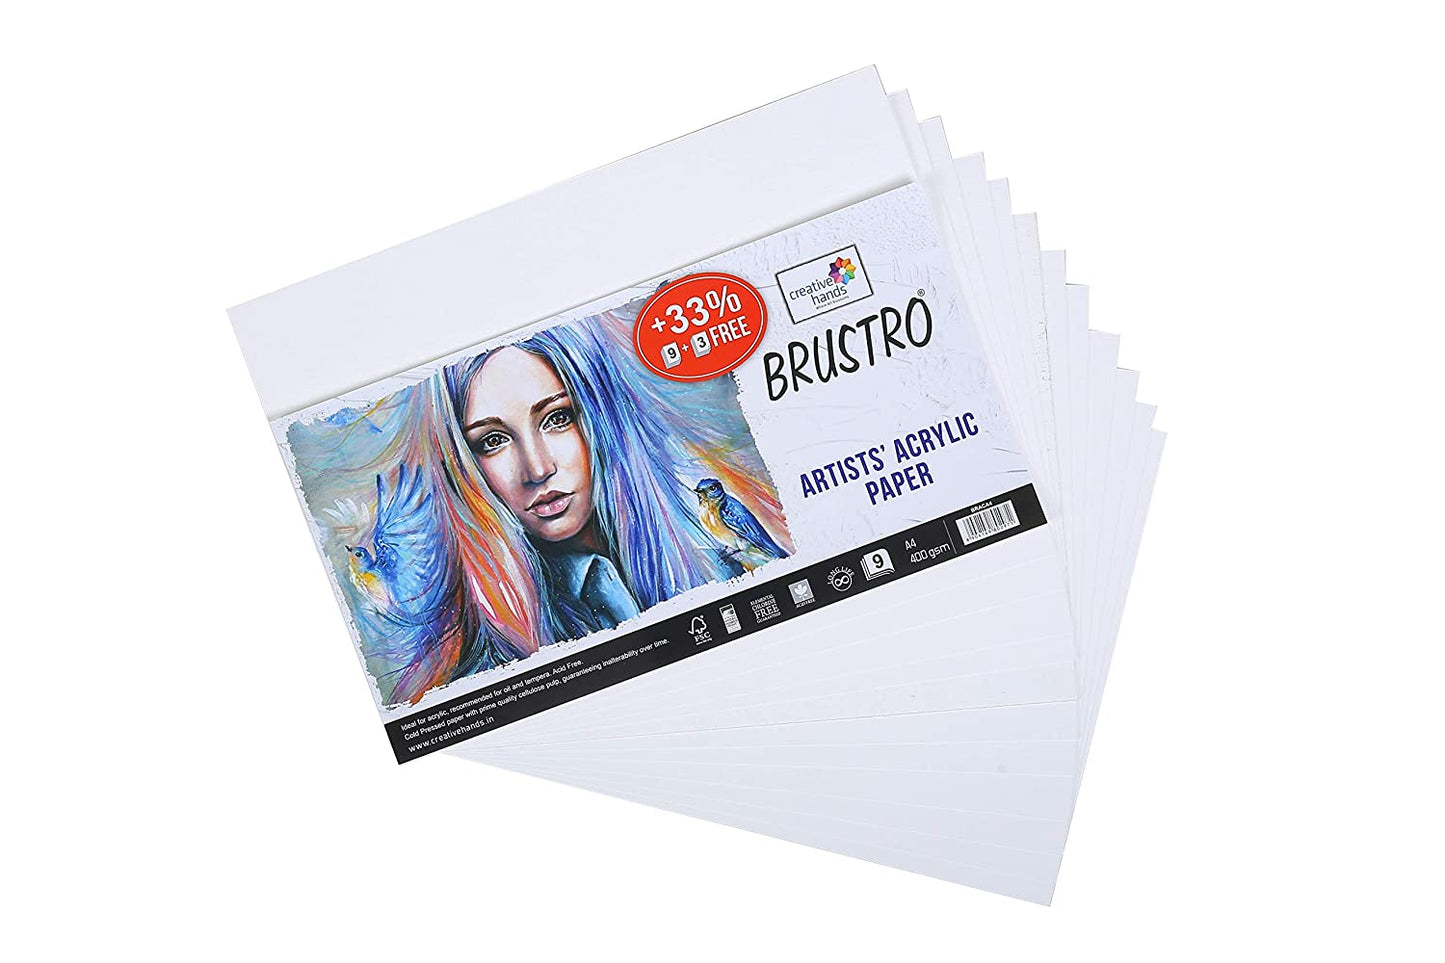 BRUSTRO Artists ’ Acrylic Colour Set of 12 Colours X 12ML Tubes with Gold Taklon Brush Set of 10 and Acrylic Paper 400 GSM A4-12 Sheets.